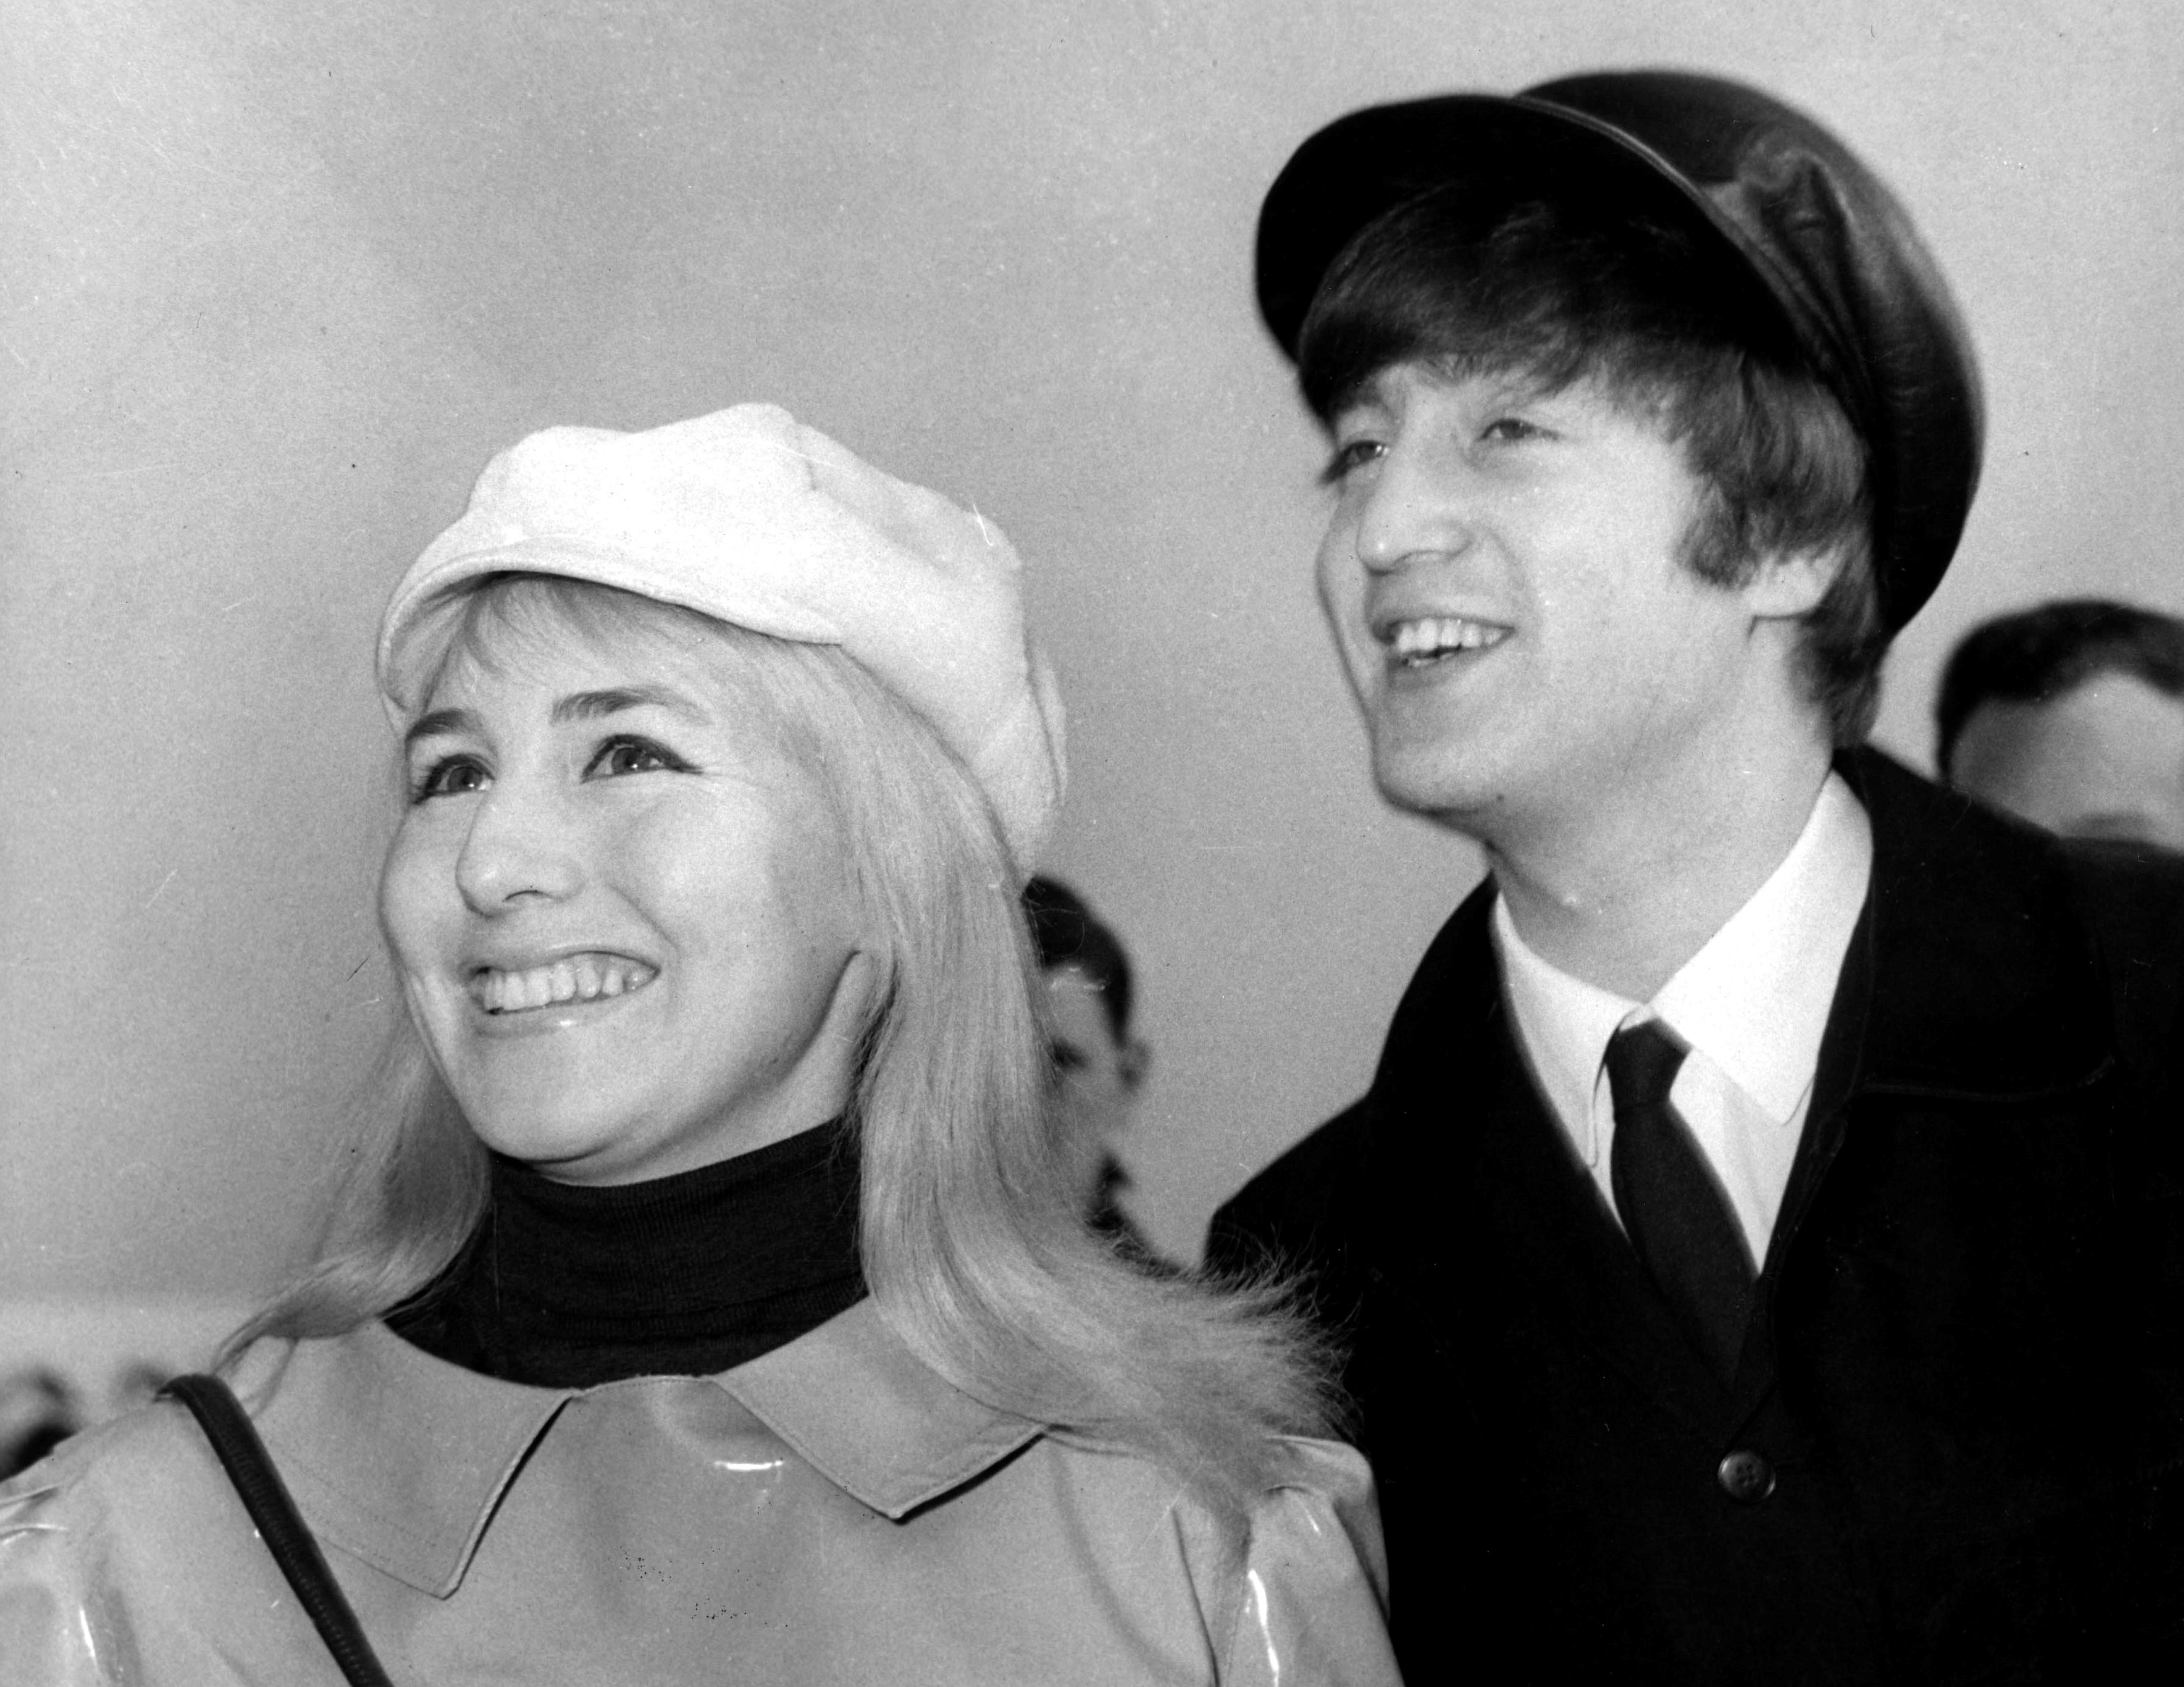 A black and white picture of Cynthia Lennon and John Lennon wearing hats.